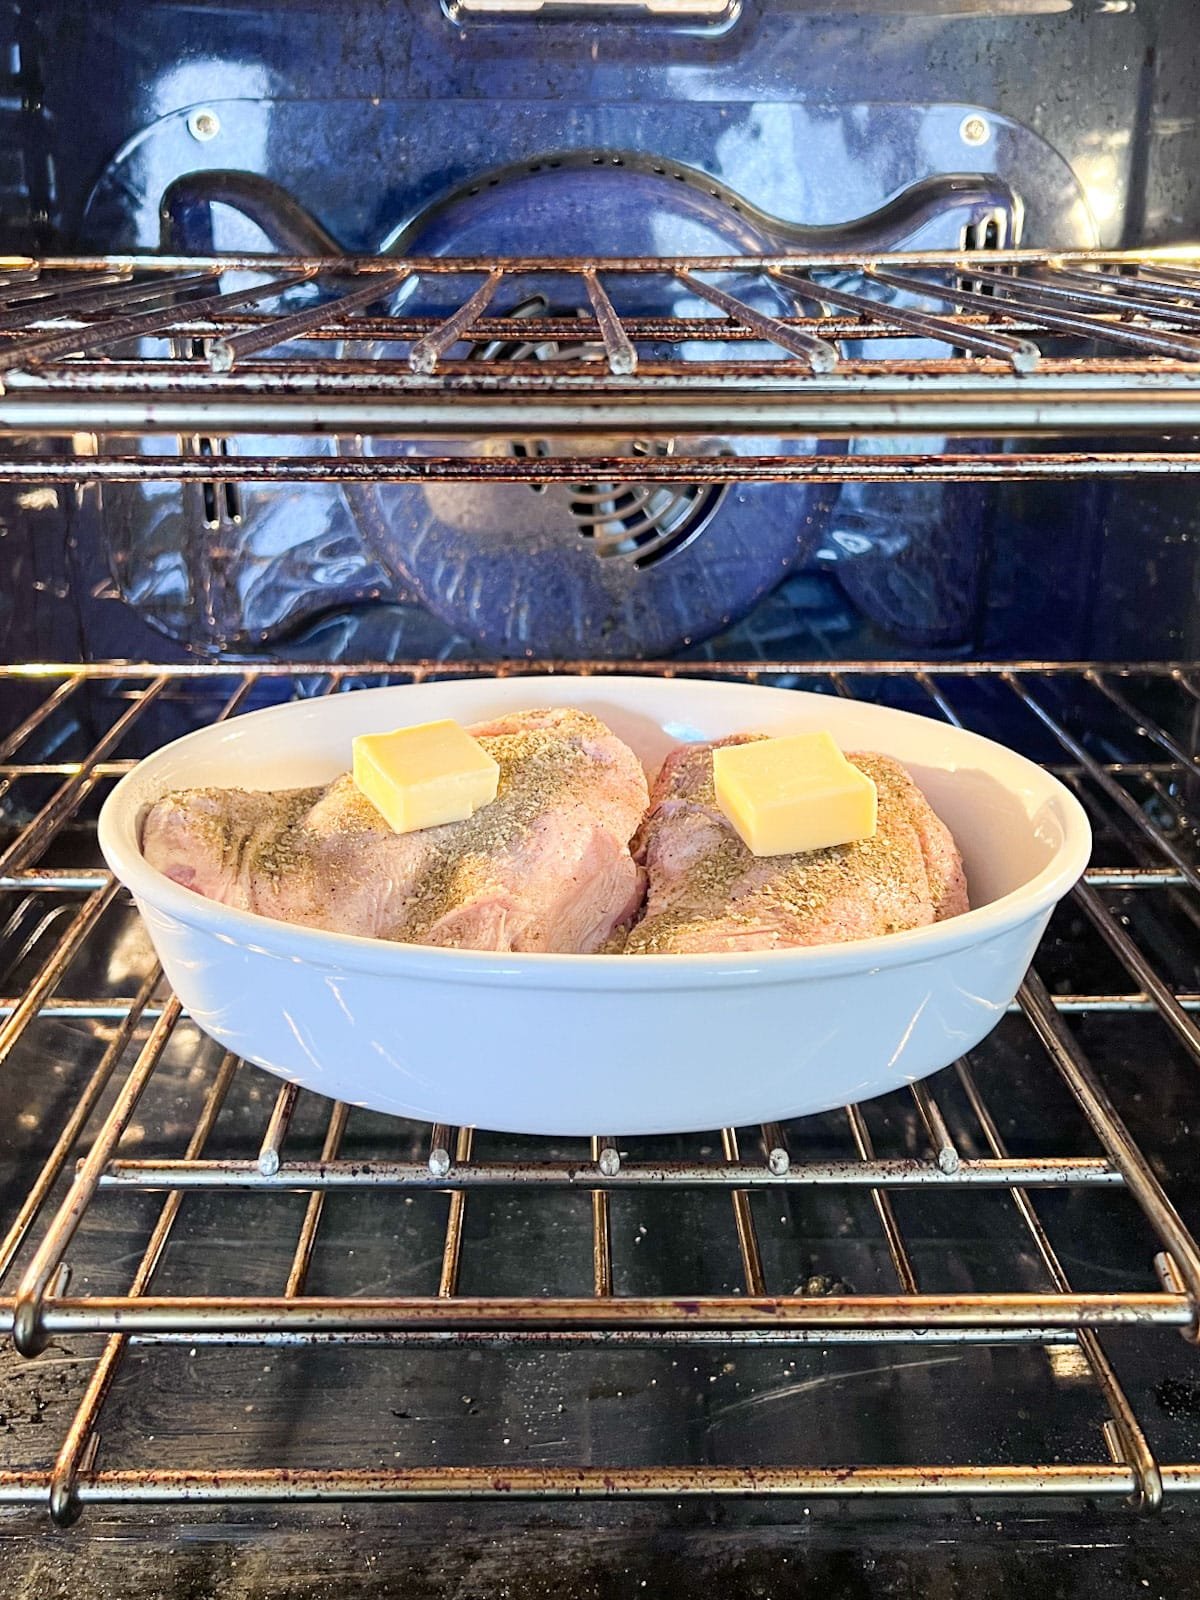 Turkey thighs in a white oval baking pan in the oven about to cook.